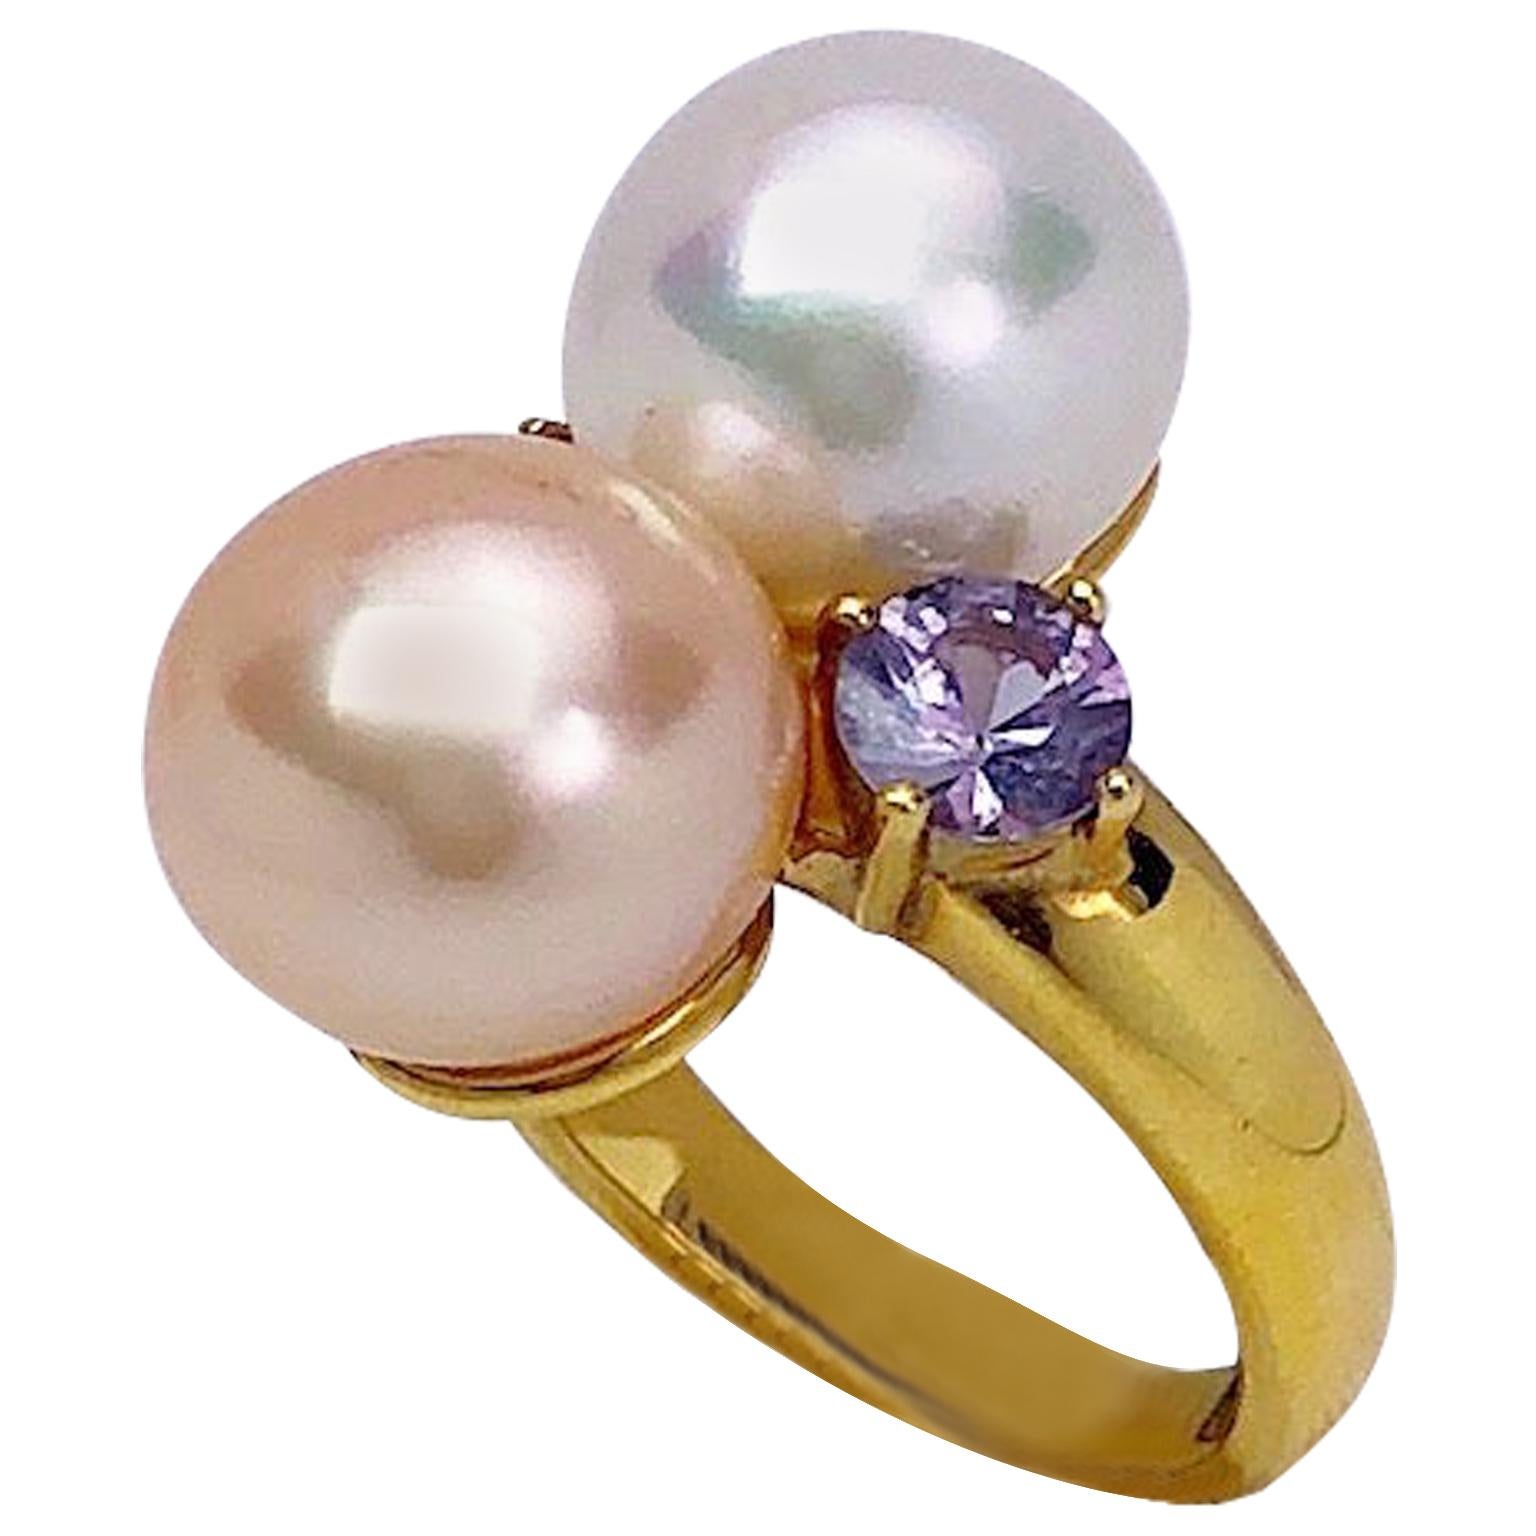 Schoeffel 18 Karat Yellow Gold Pearl Ring with Pink and Lavender Sapphires For Sale